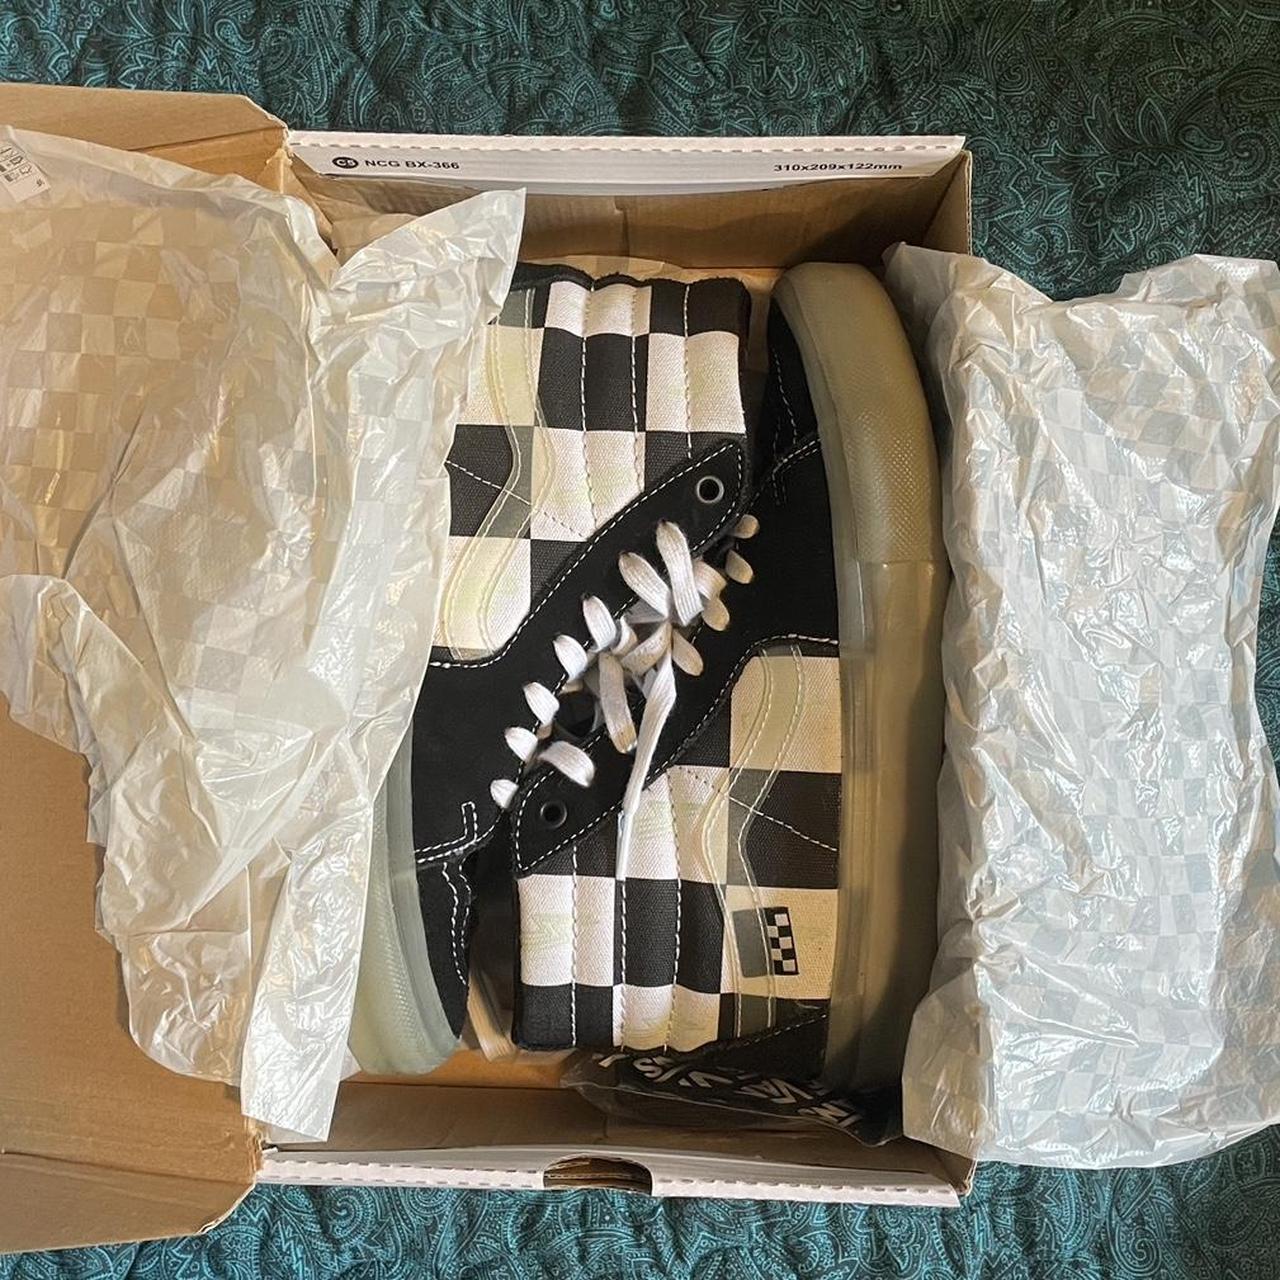 9/10 condition - slightly dirty, but should be able... - Depop